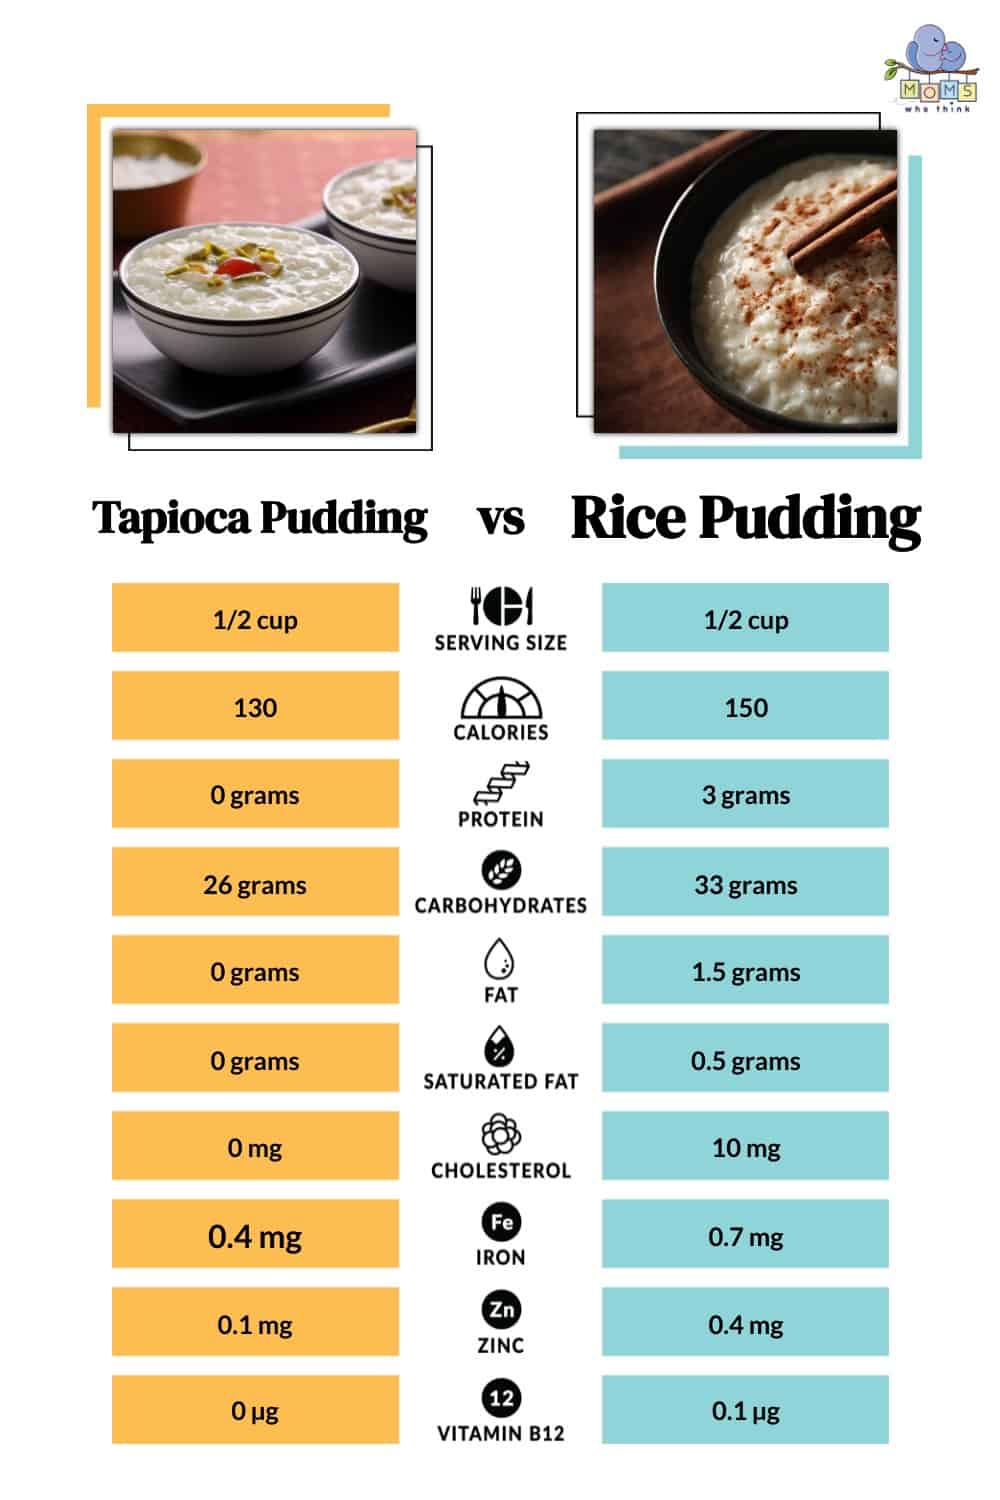 Tapioca Pudding vs Rice Pudding: Which is Healthier